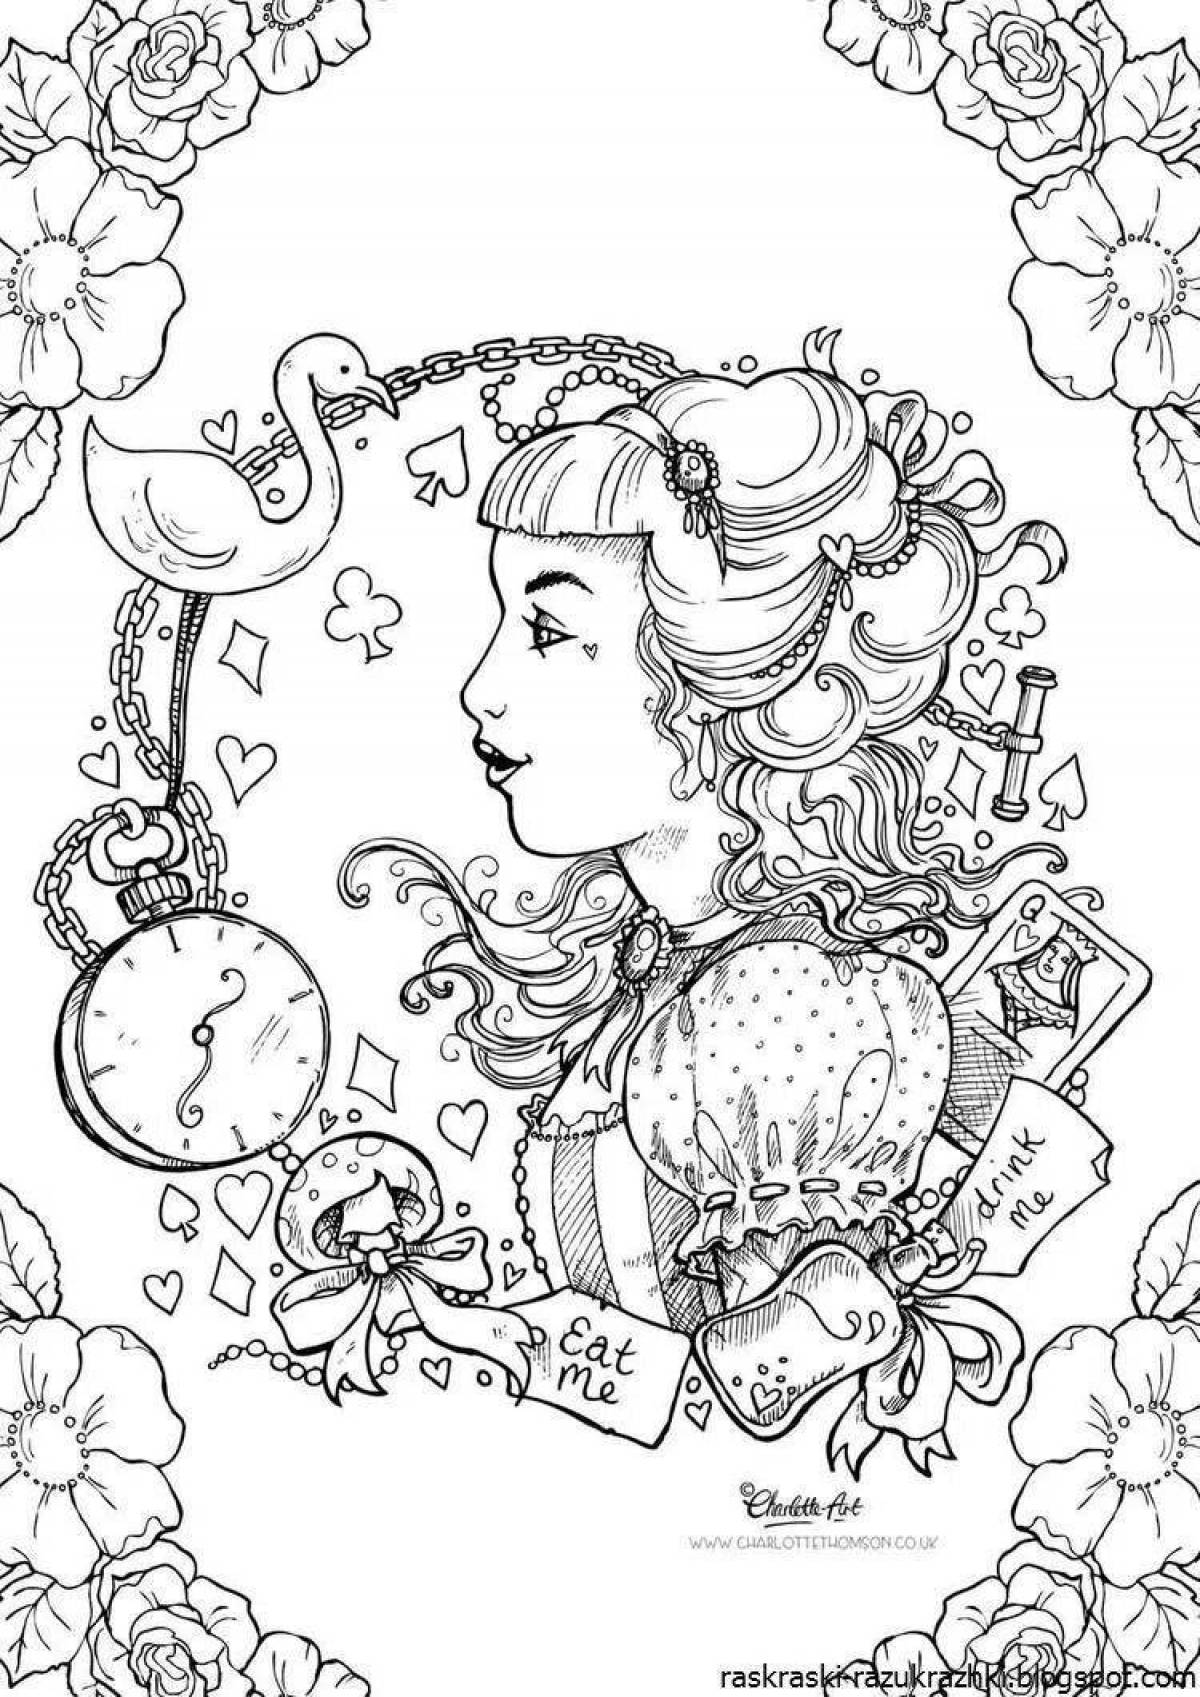 Fancy Alice coloring pages for girls